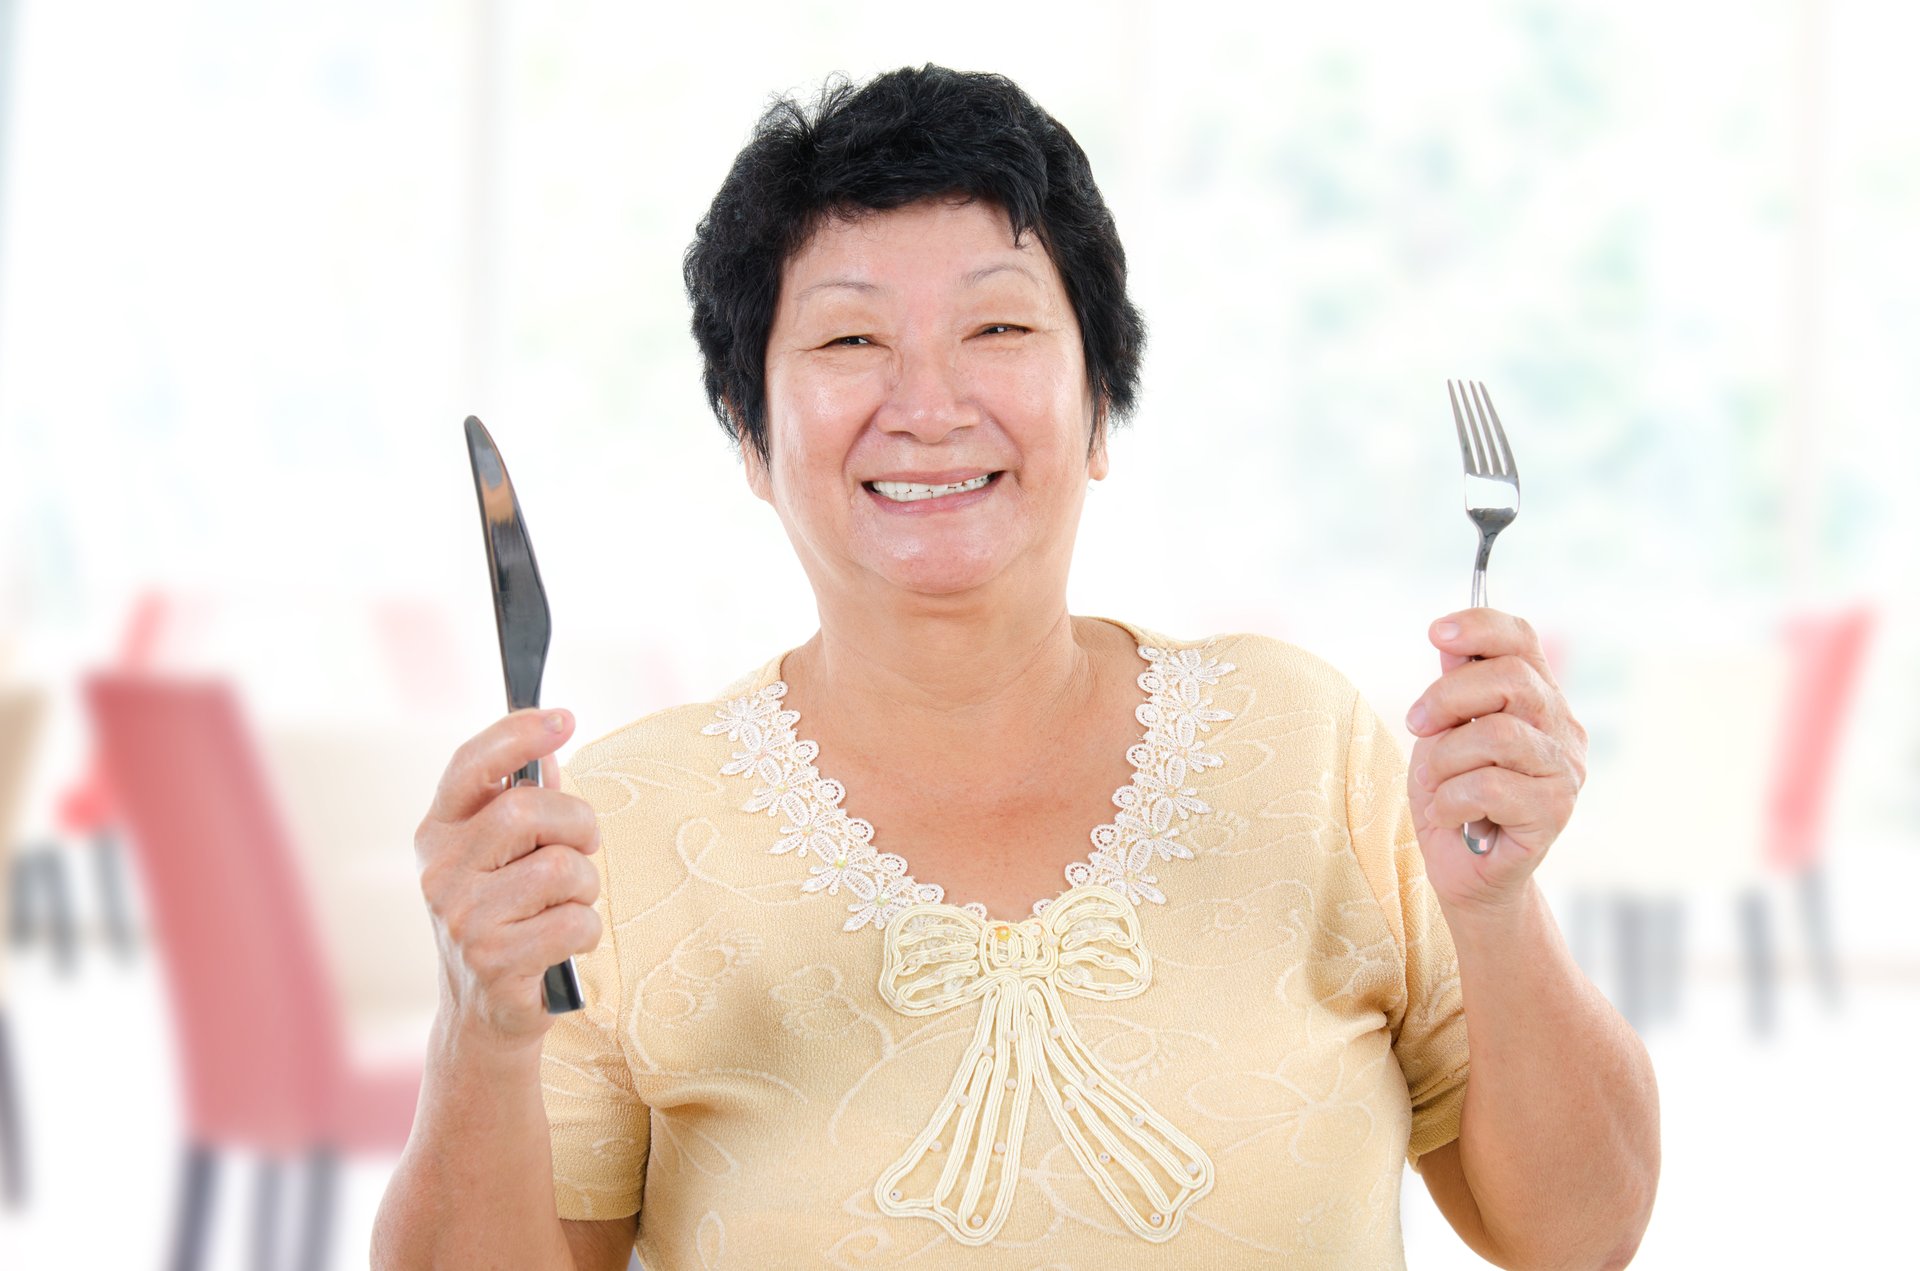 A senior Asian woman holds up a knife and fork at a restaurant